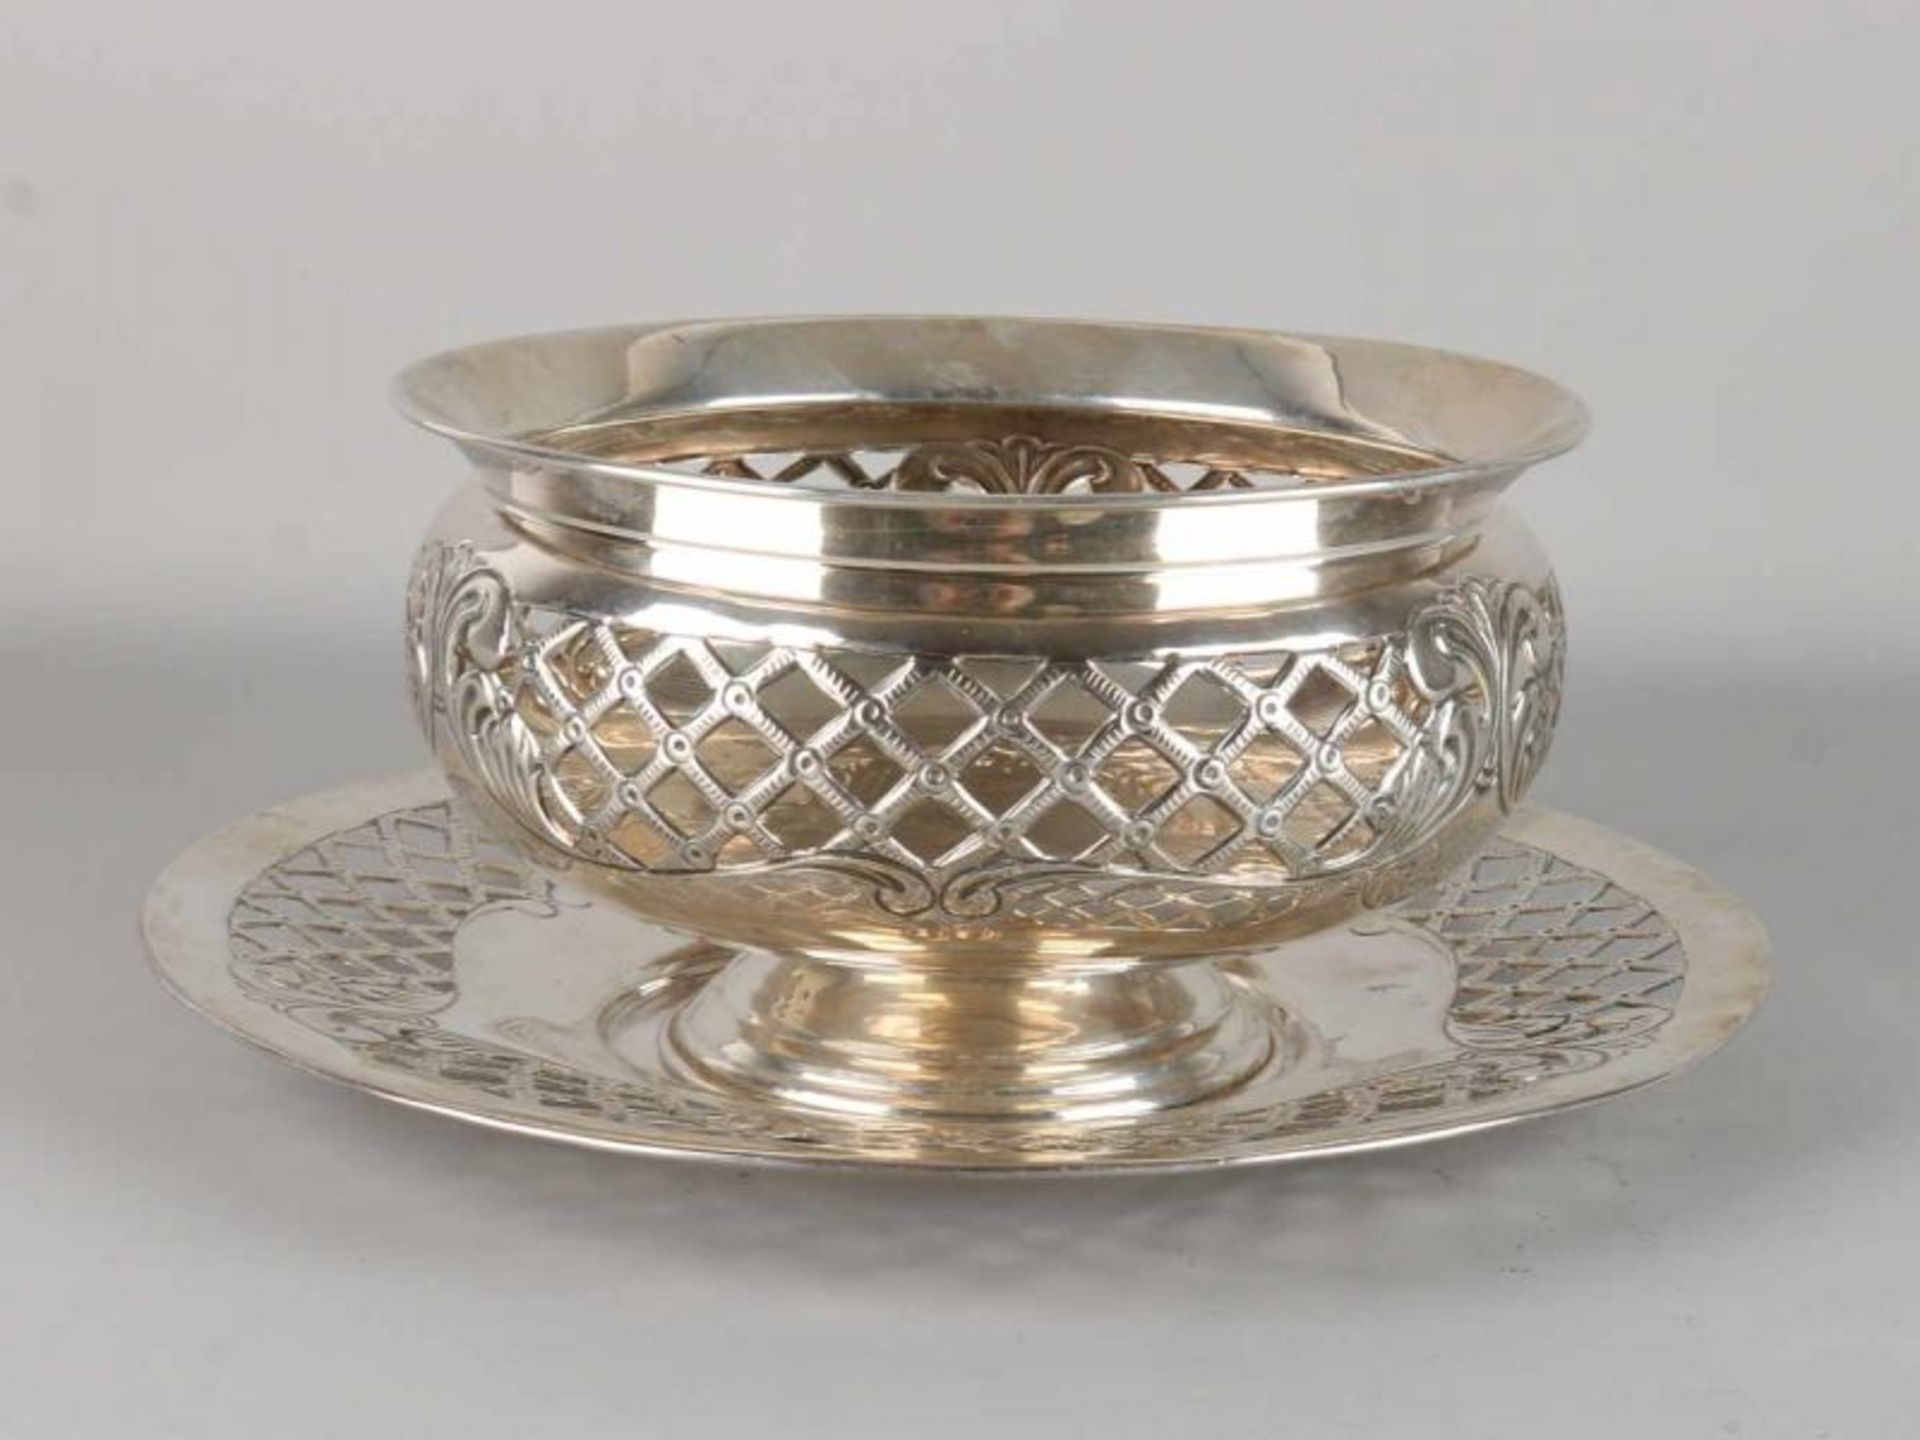 Beautiful silver serving plate with lower dish, 835/000, round model with sawn grid pattern, and - Image 2 of 3